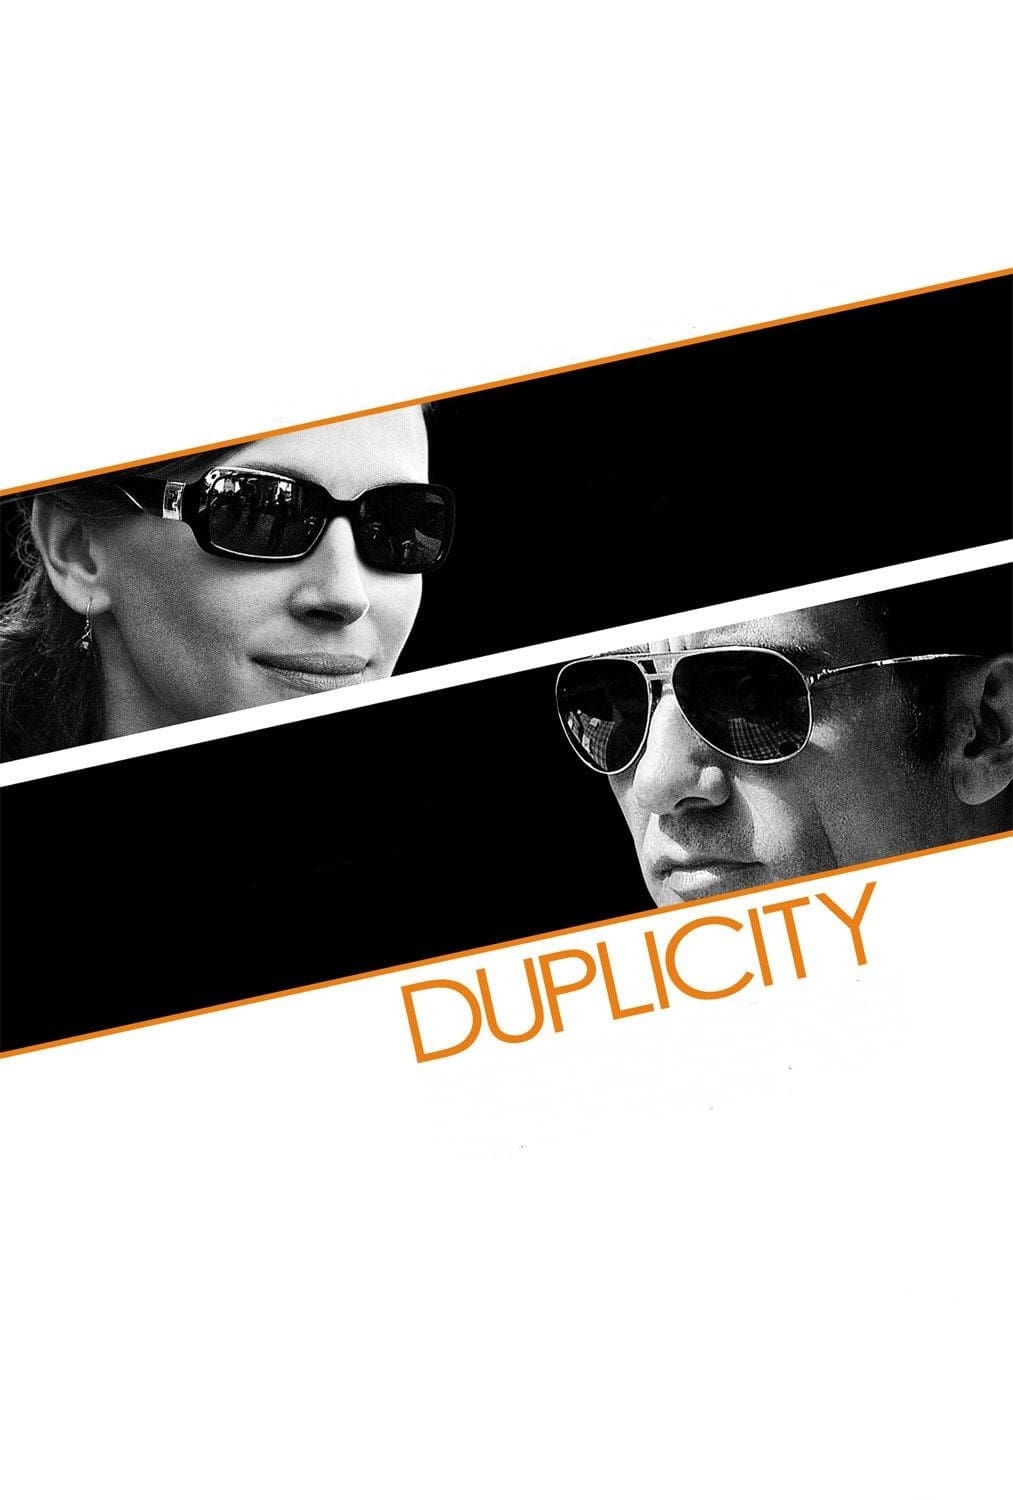 Duplicity streaming